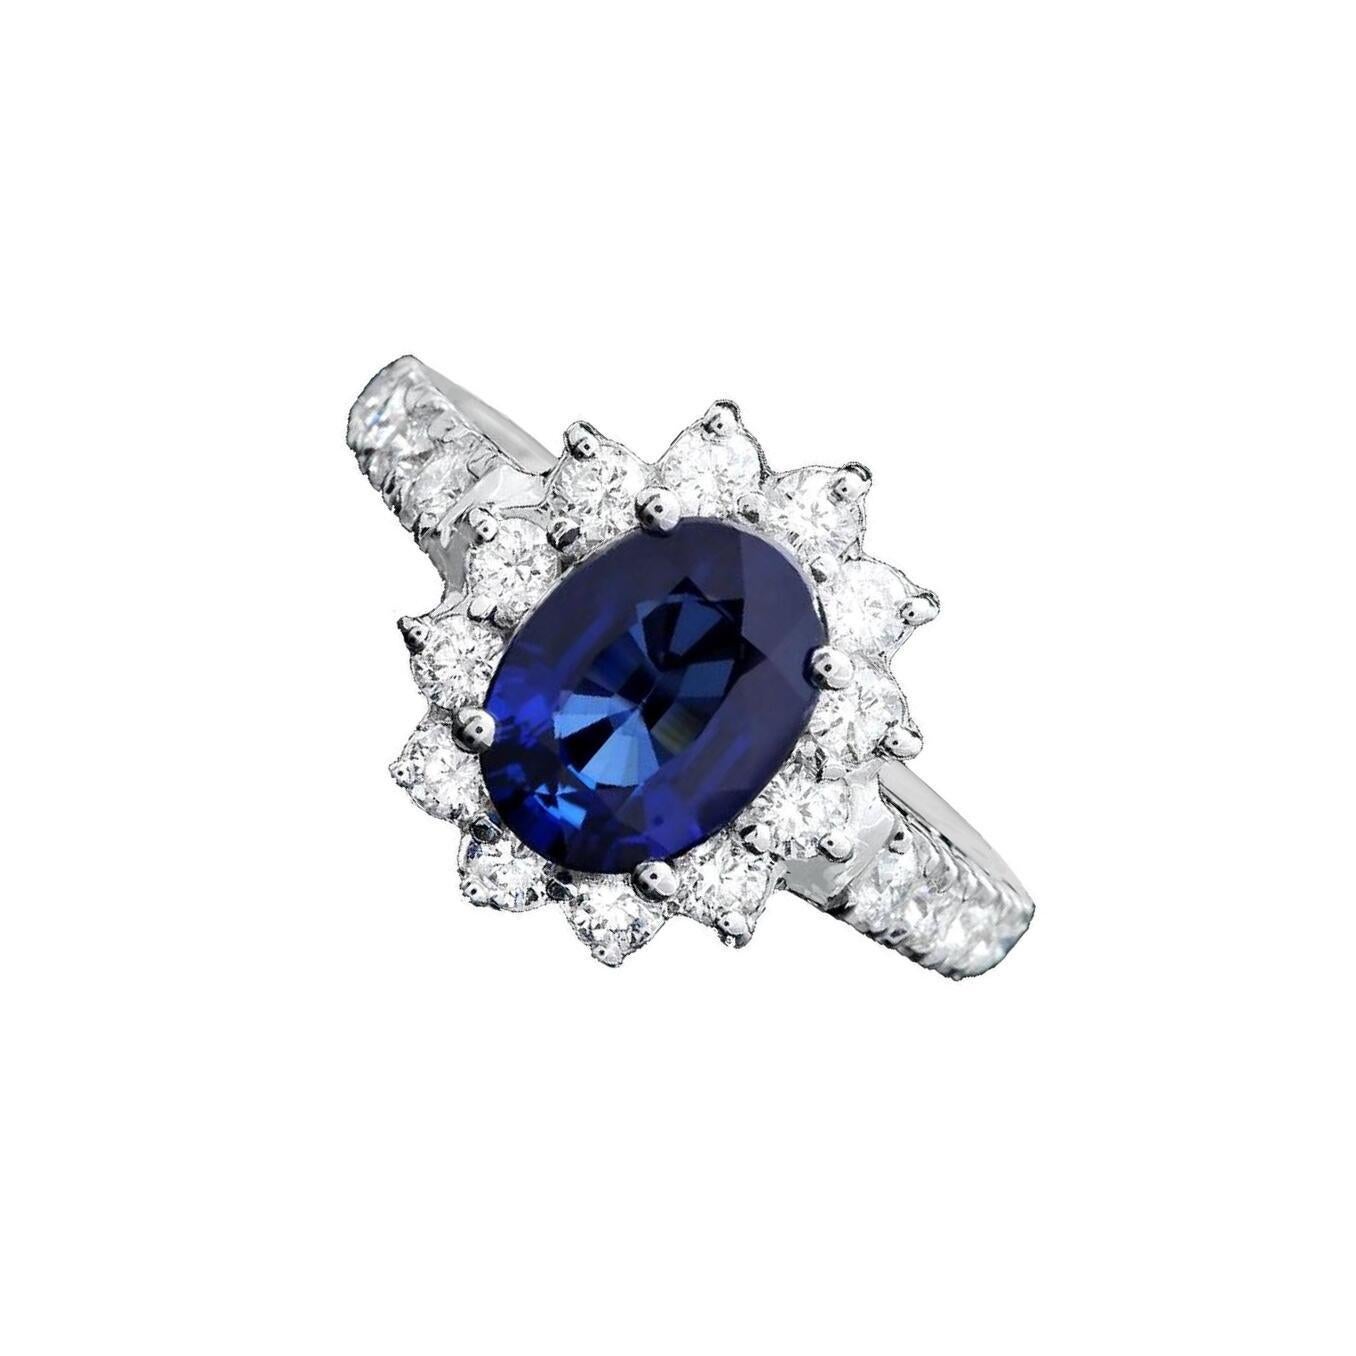 3.15 Carats Exquisite Natural Blue Sapphire and Diamond 14K Solid White Gold Ring

Total Blue Sapphire Weight is: 2.50 Carats (Diffused)

Sapphire Measures: 9.00 x 7.00mm

Natural Round Diamonds Weight: 0.65 Carats (color G-H / Clarity